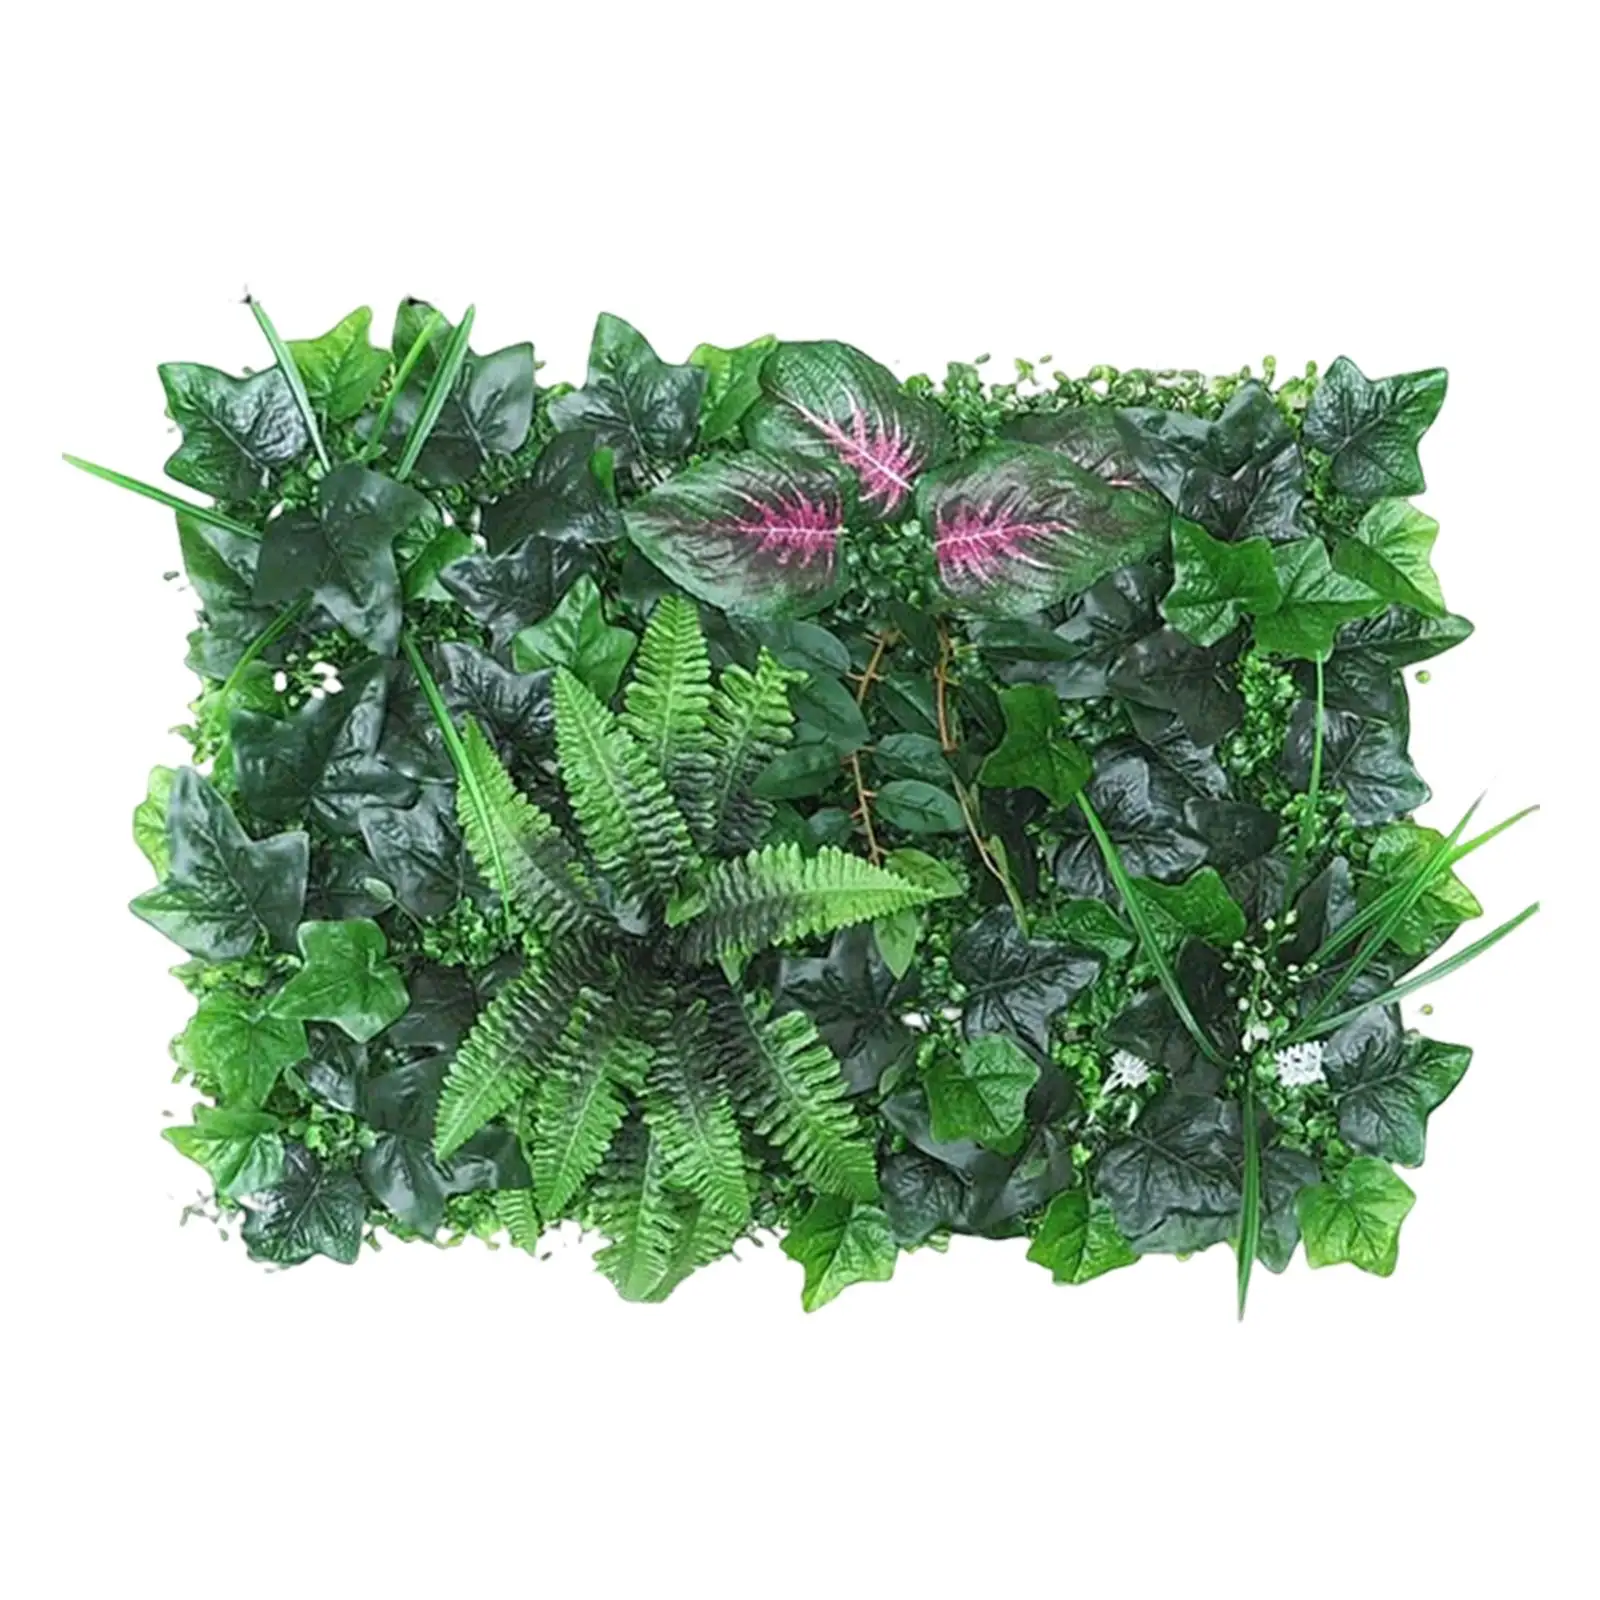 Artificial Green Wall Fake Grass Privacy Fence Screening Wall Decor Plastic Green Leaf Artificial Plants Panel for Home